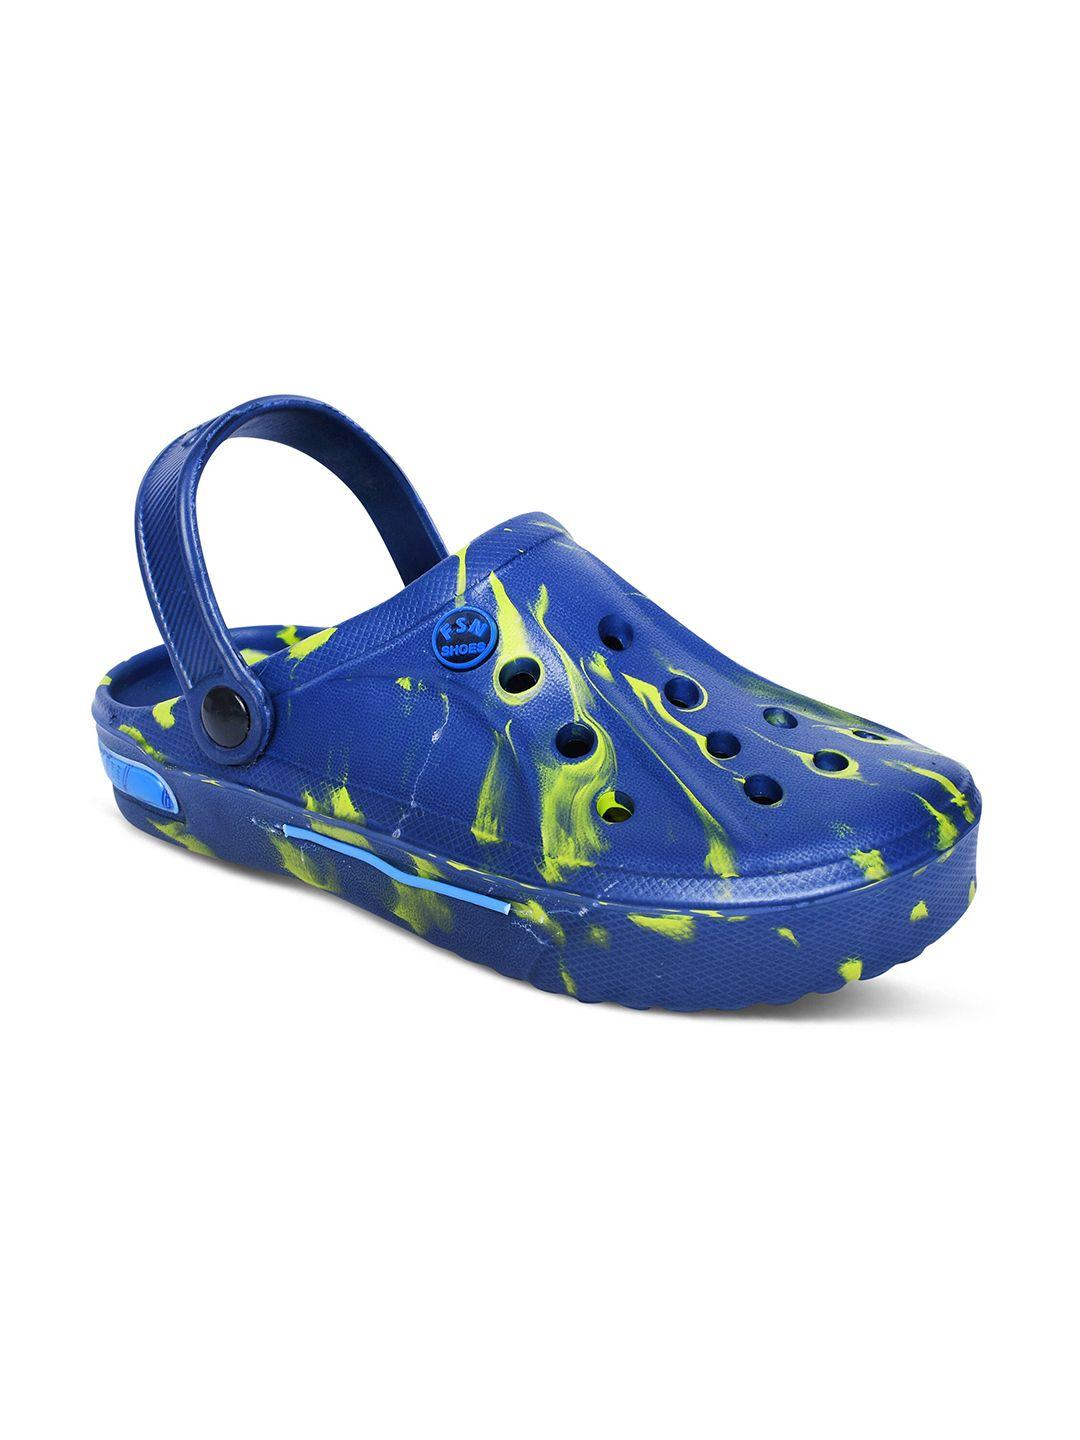 airspot unisex abstract canvas printed clogs